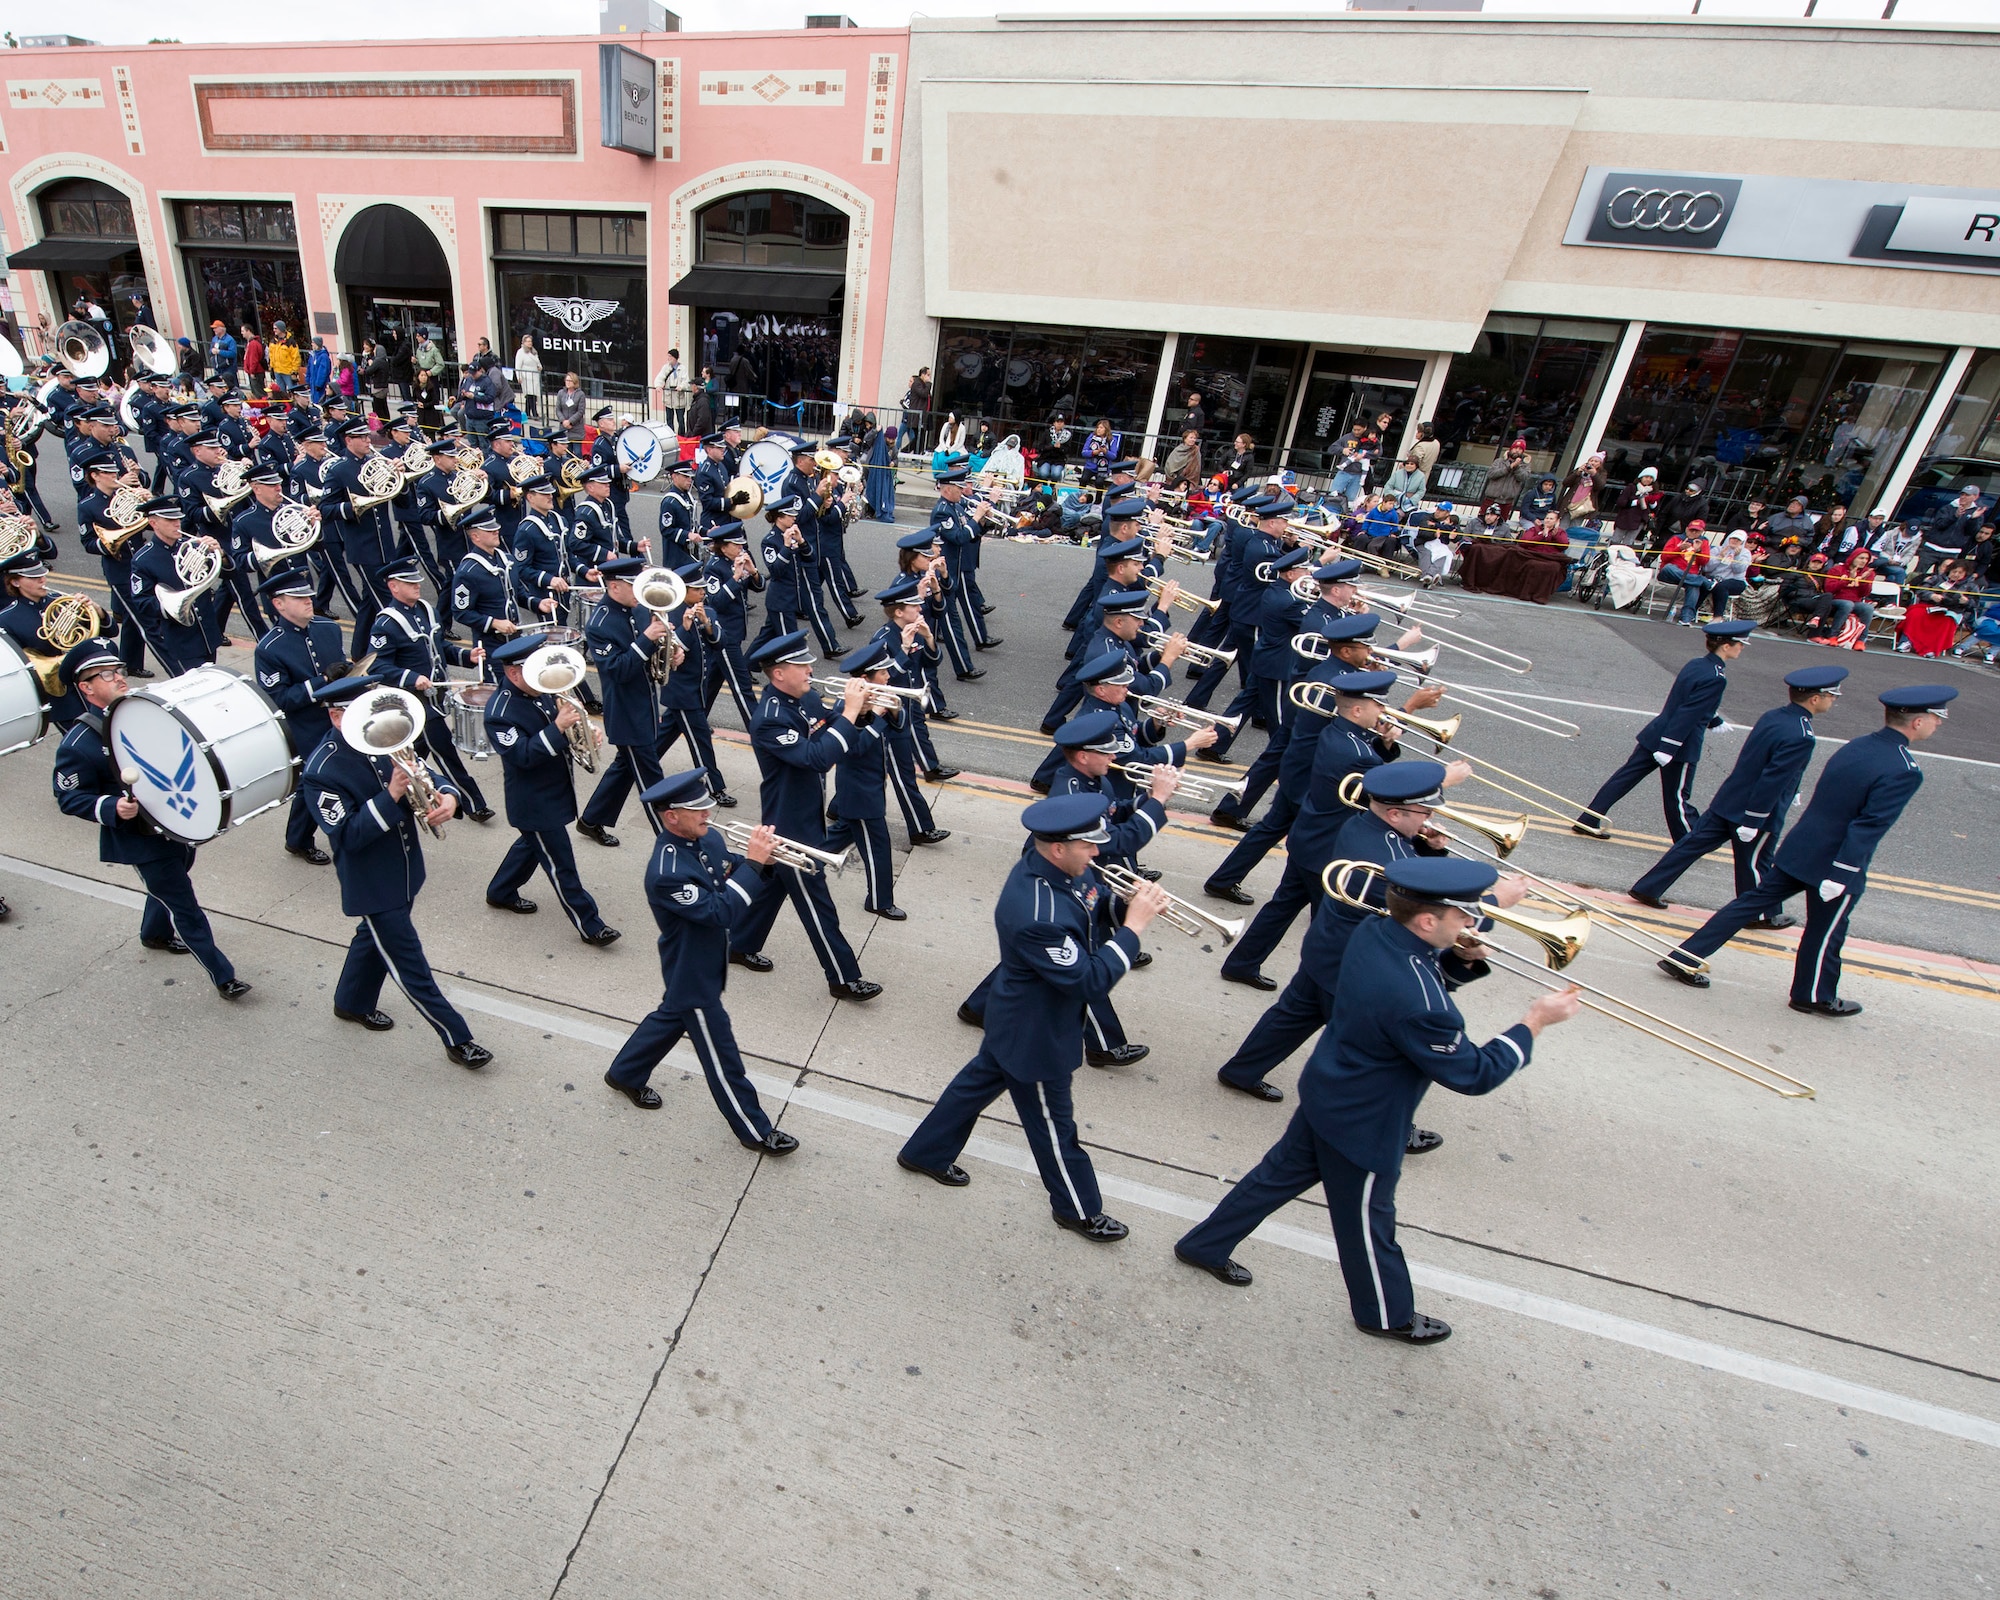 The United States Air Force Total Force Band performs in the 128th Rose Parade in Pasadena, Calif., Jan. 2, 2017. The USAF Total Force Band kicked off the Air Force 70th Birthday celebration playing several venues in Southern California culminating with their appearance in the Rose Parade. The band is comprised of active-duty and Air National Guard musicians from around the Air Force. (U.S. Air Force photo/Louis Briscese)